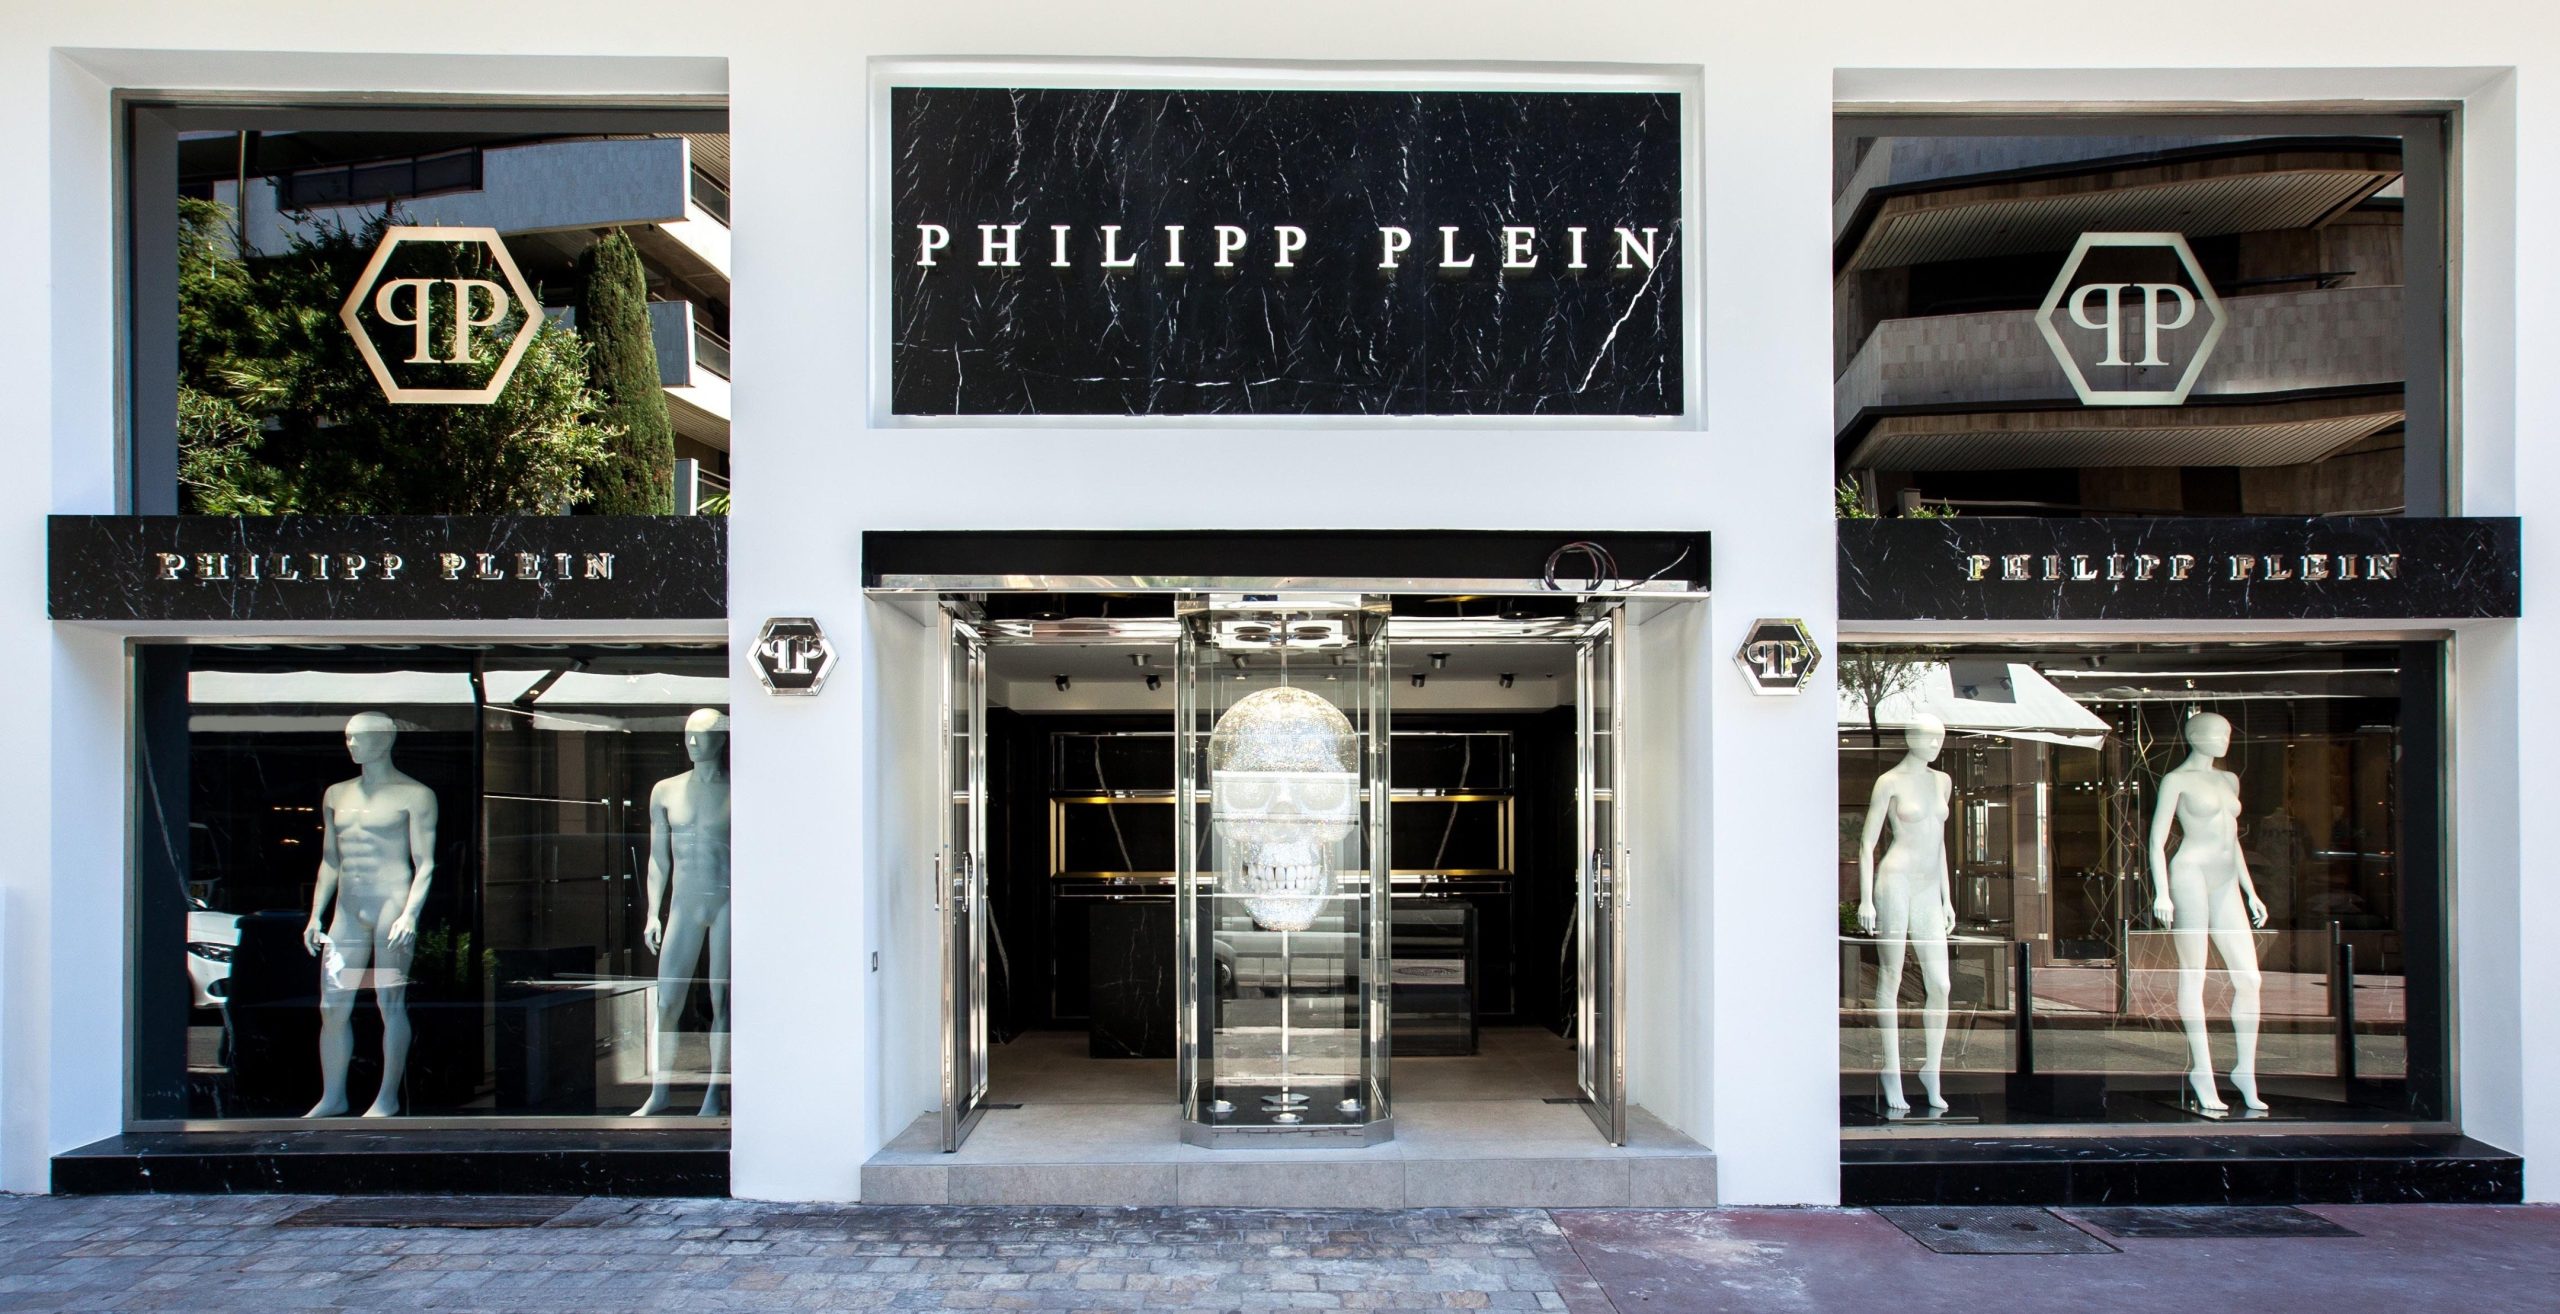 Philipp Plein is the first major fashion brand to accept cryptocurrency